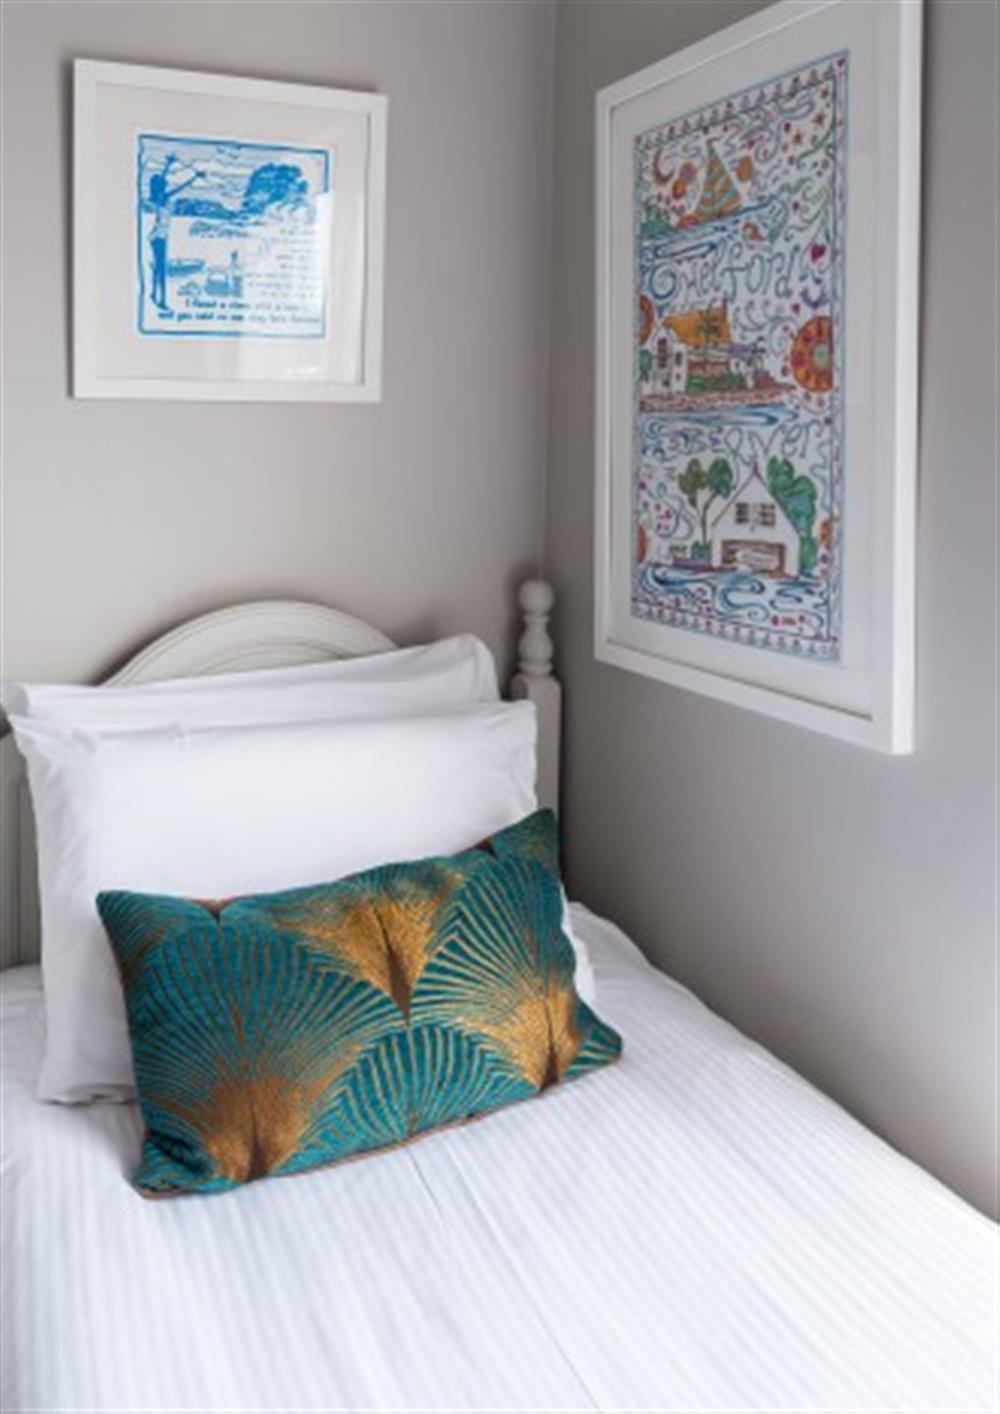 A closer look at the pictures in the twin bedroom. at Smugglers in Helford Passage